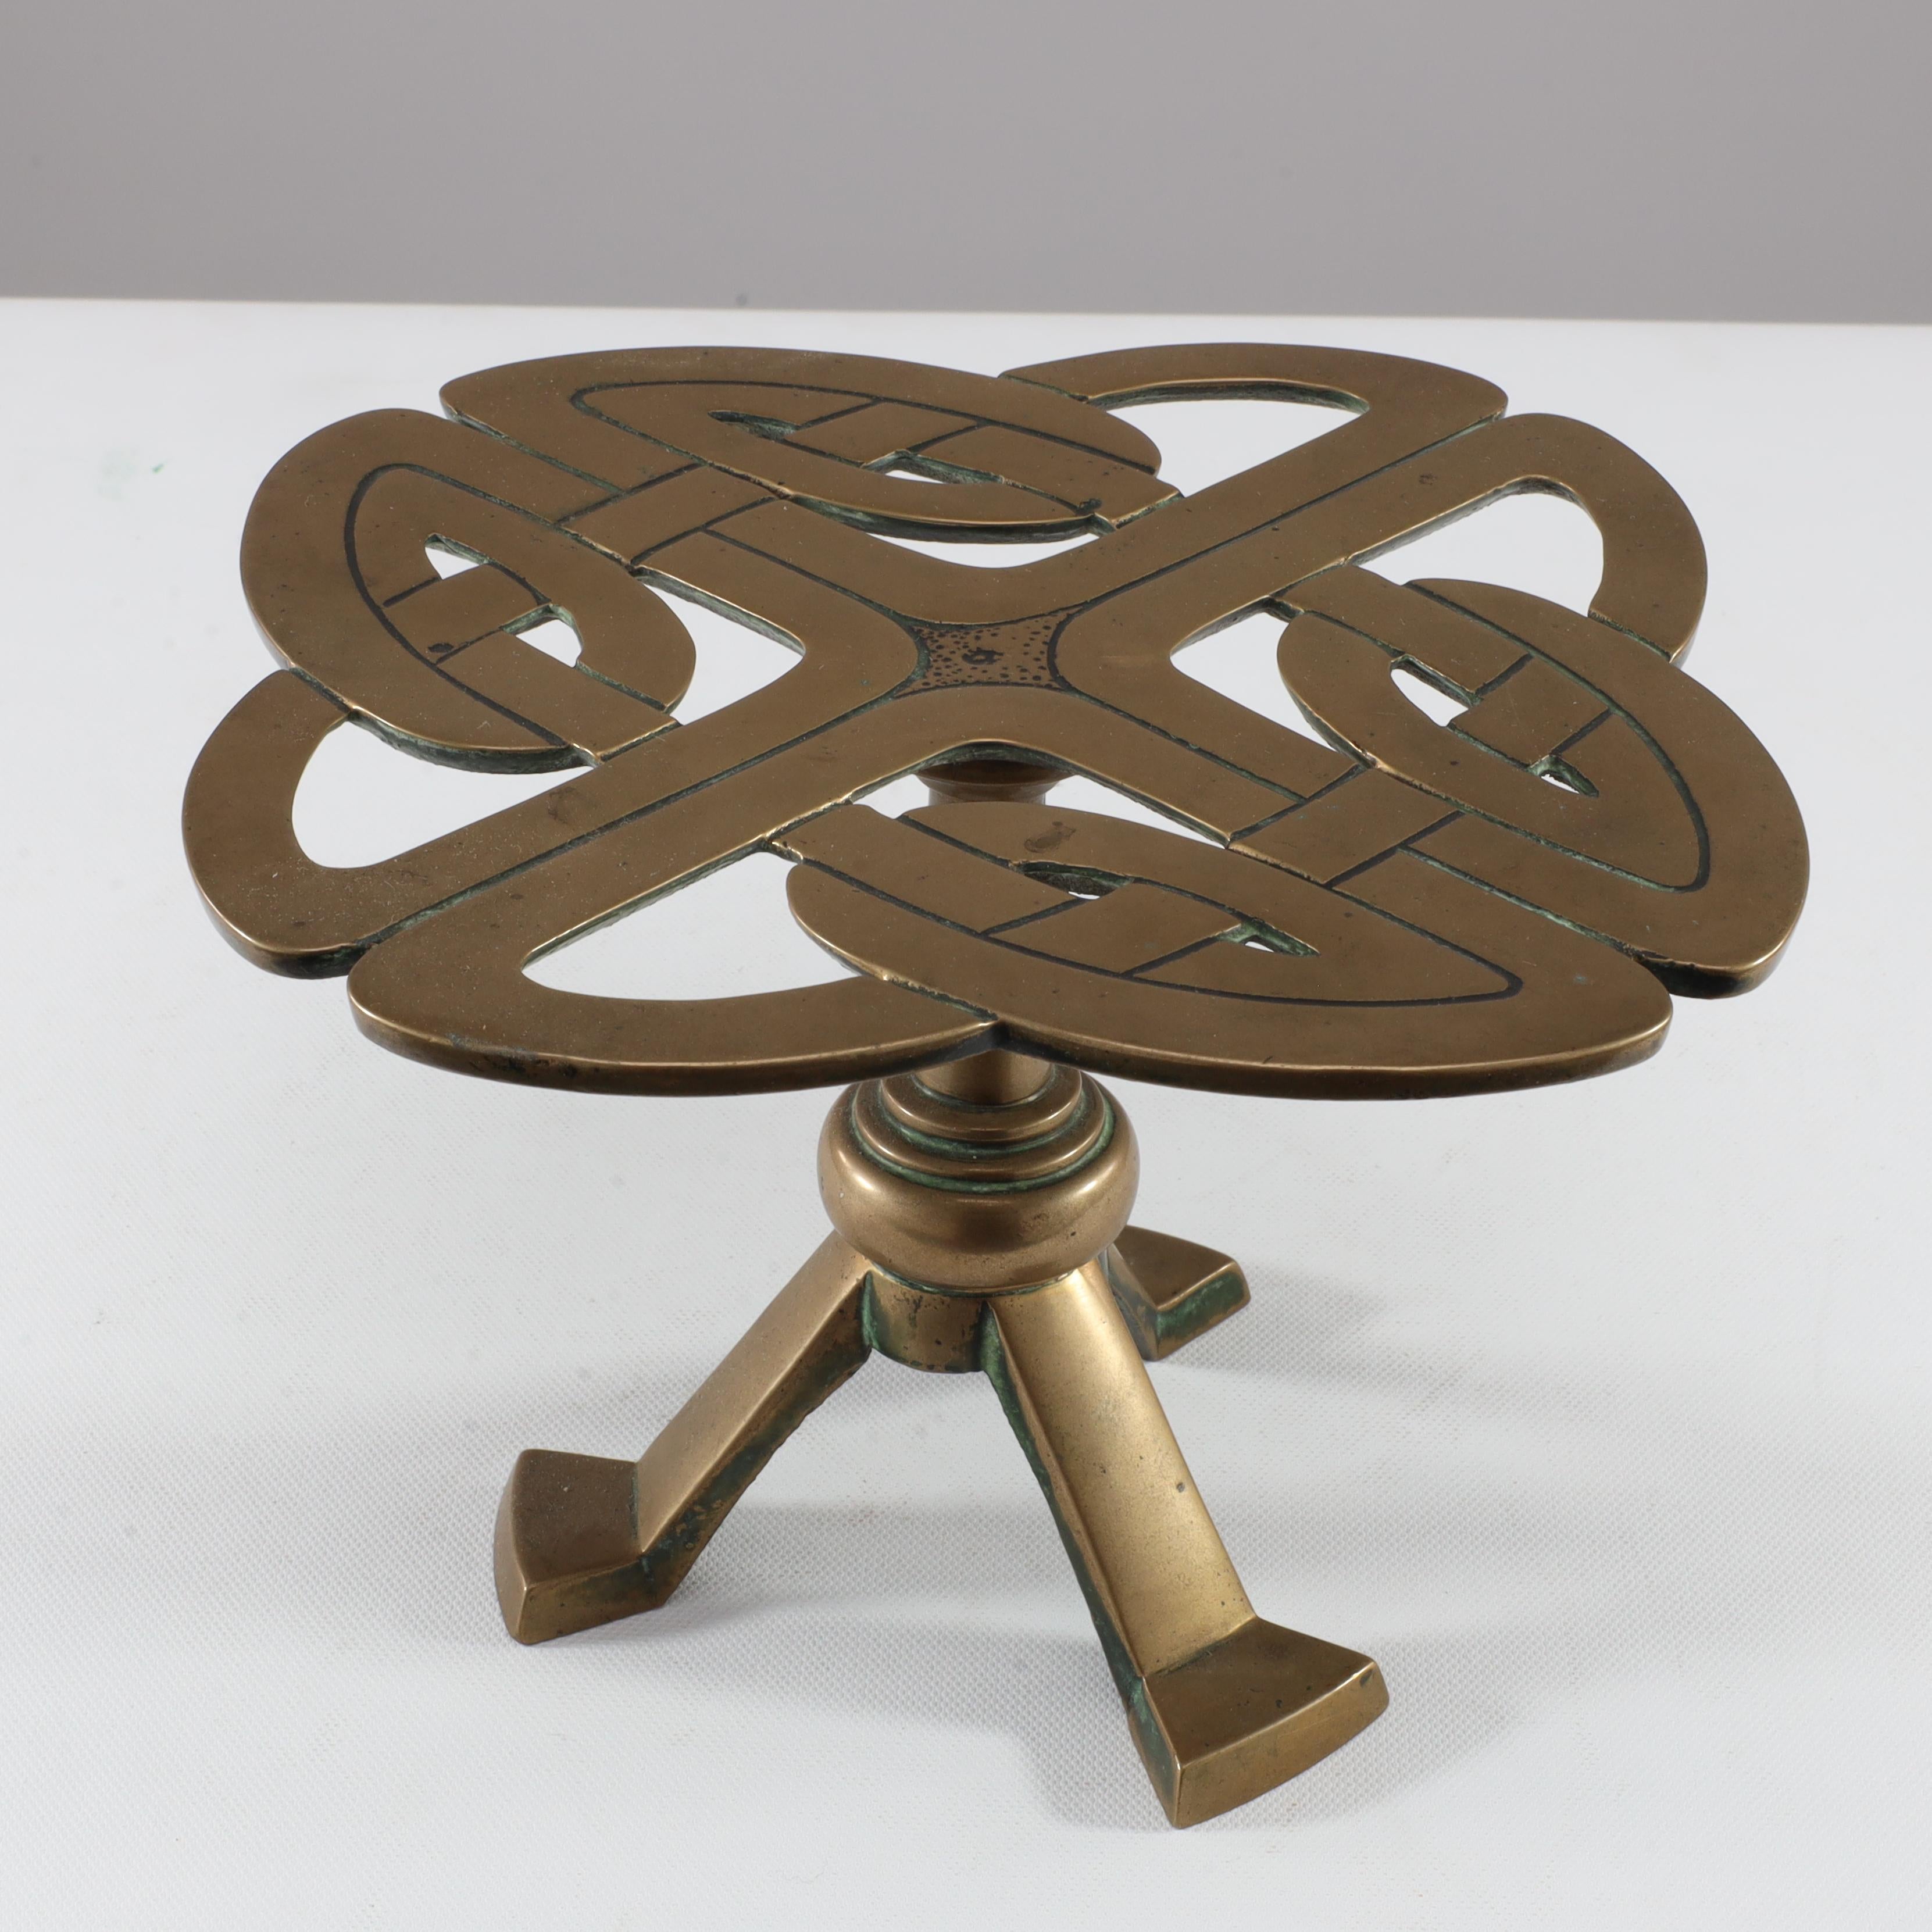 A good stylish Glasgow School brass trivet attributed to Margaret Gilmour with stylized Celtic interlaced details on three angled legs with out swept feet.